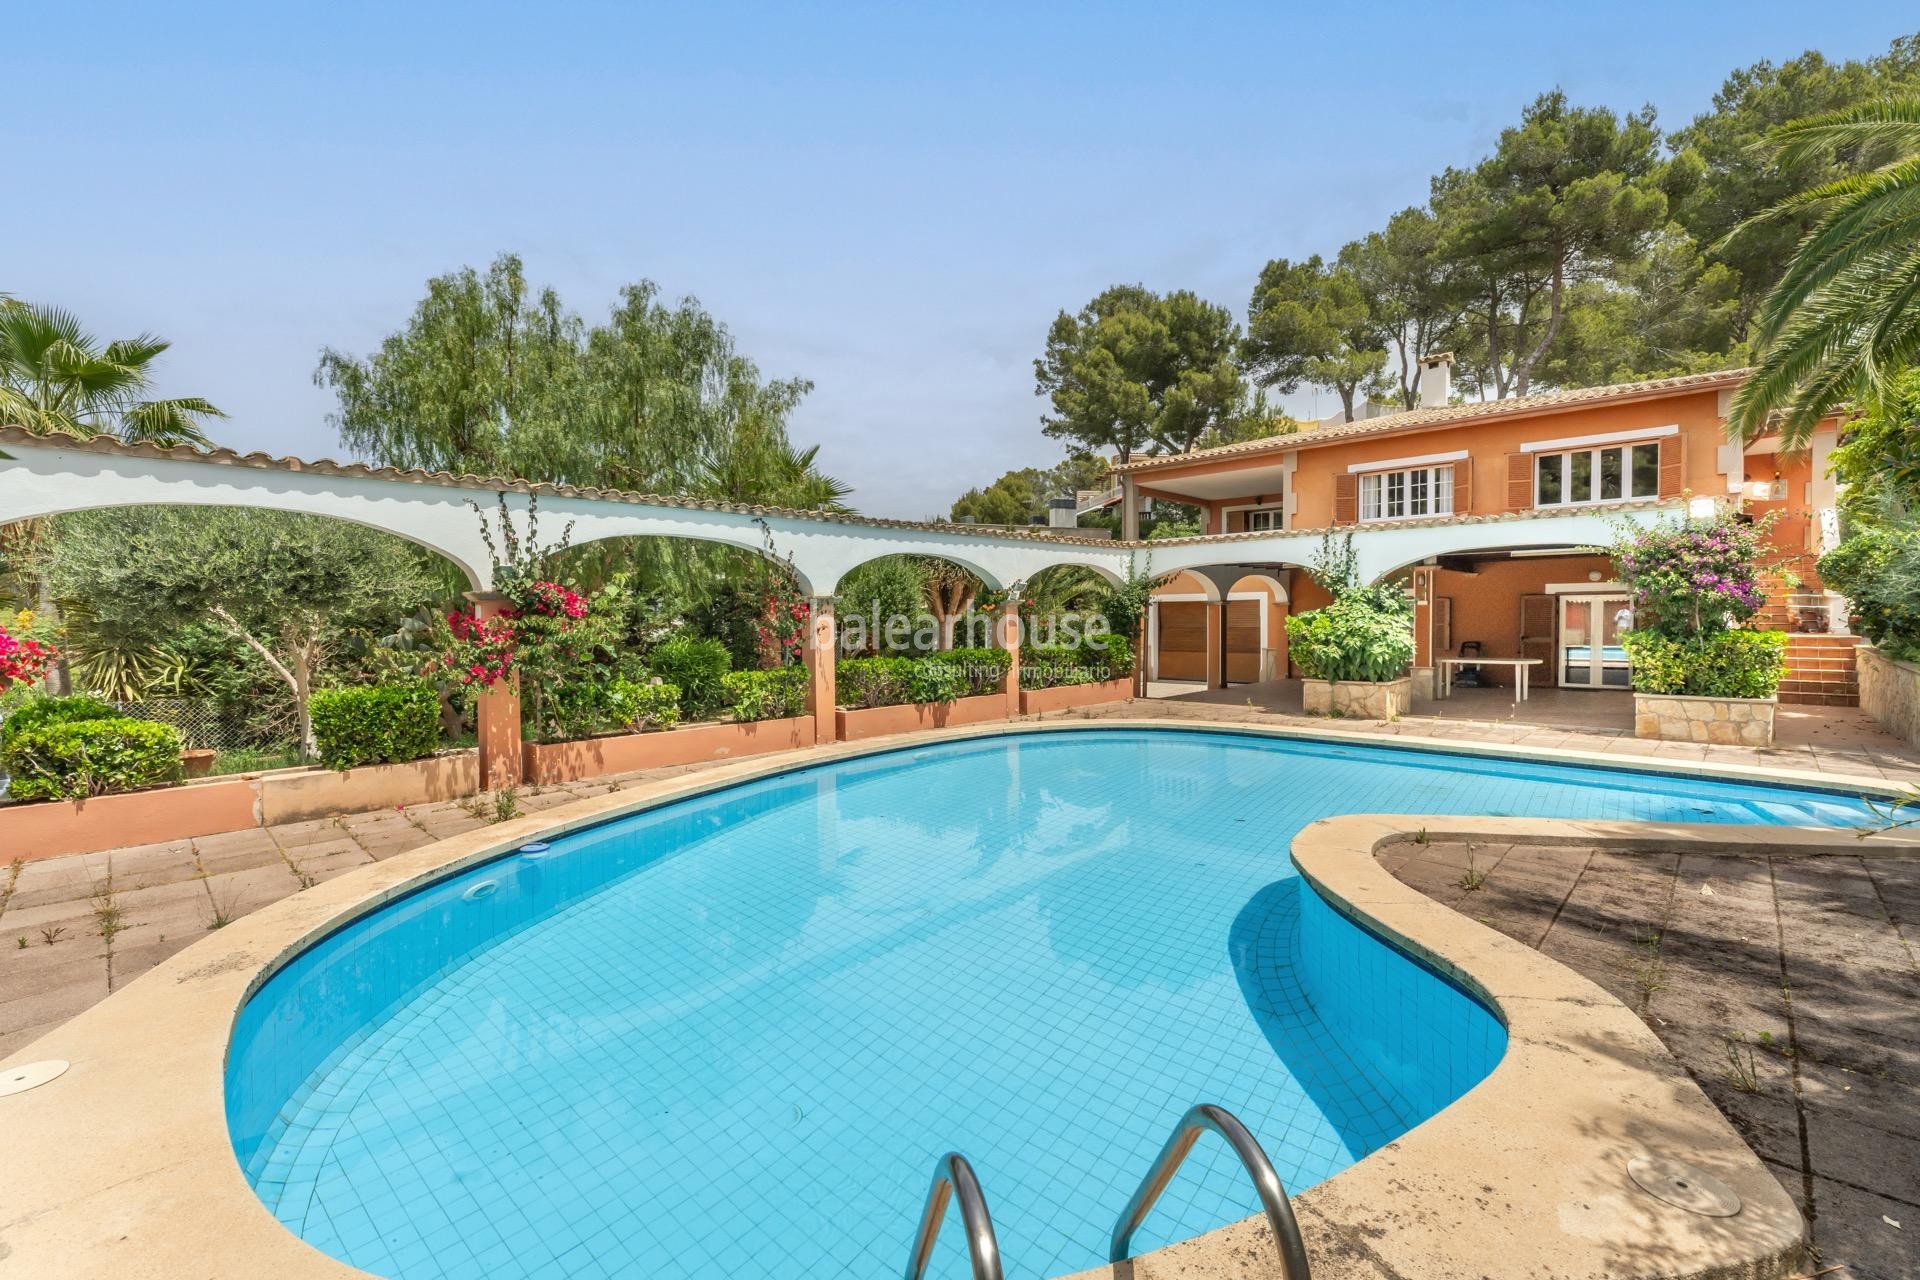 Well-maintained Mediterranean villa with large terraces and pool near the beach in Santa Ponsa